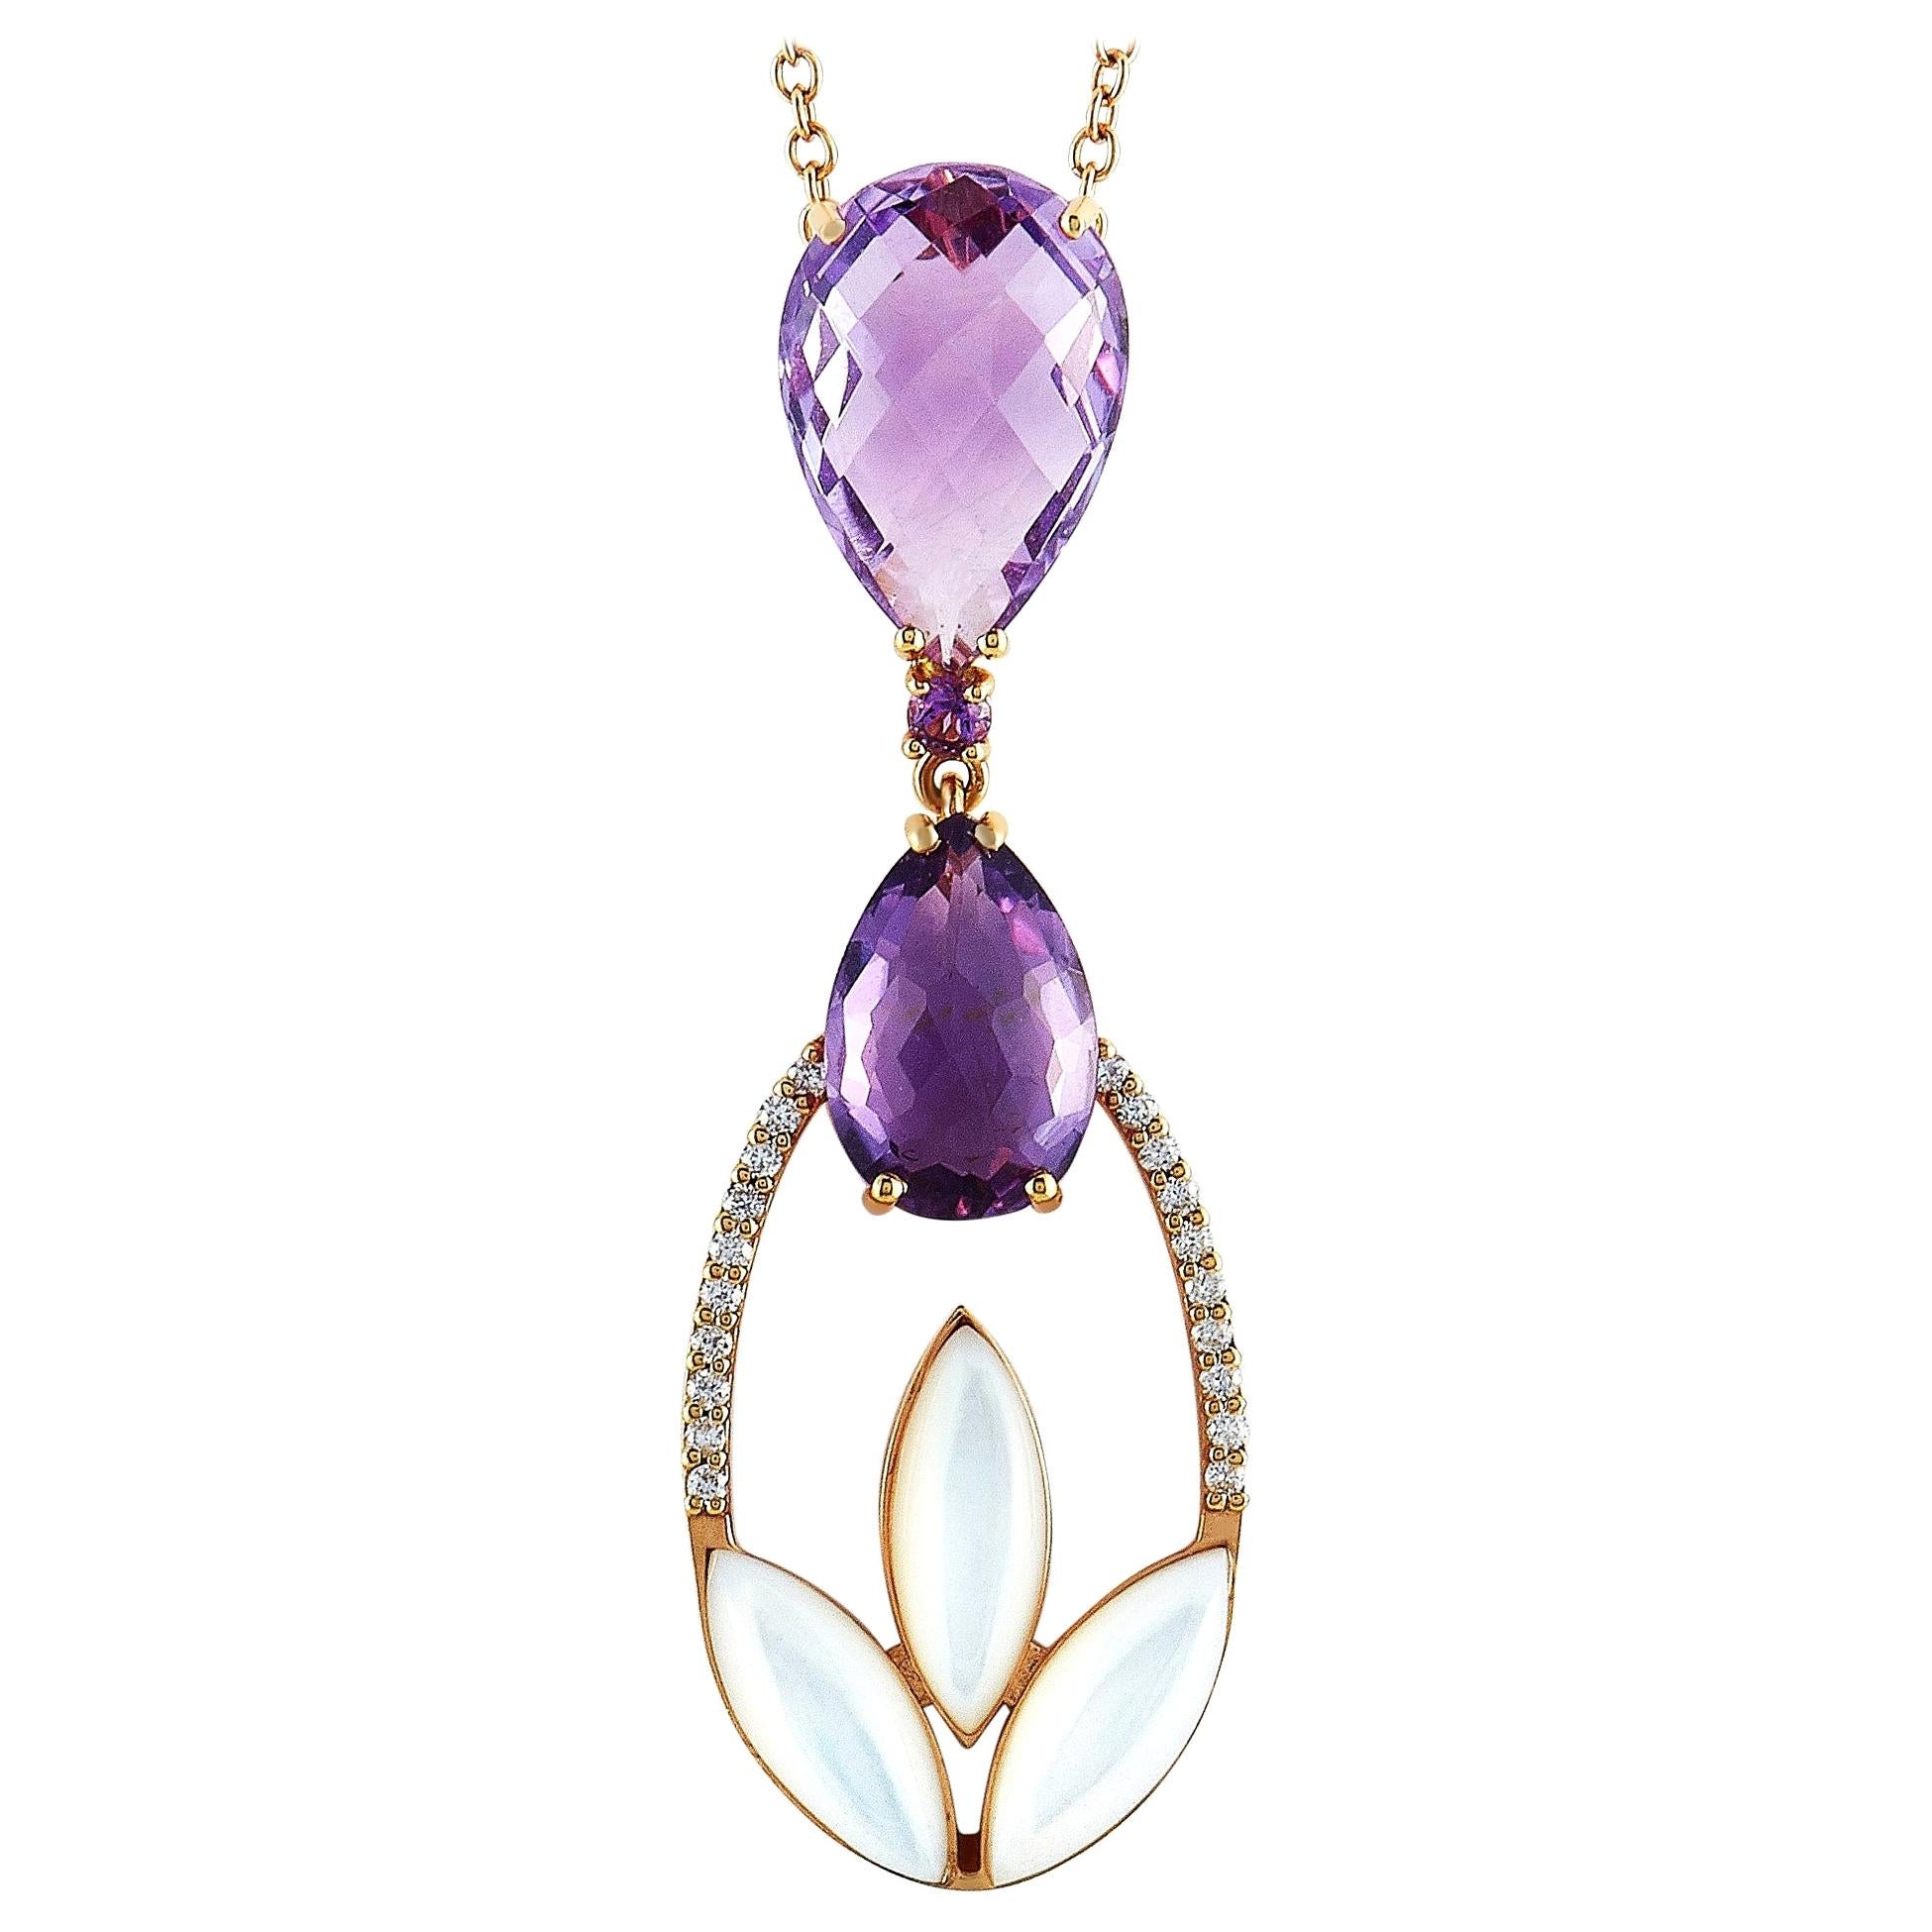 Oro Trend 18 Karat Gold 0.18 Carat Diamond Amethyst and Mother of Pearl Necklace